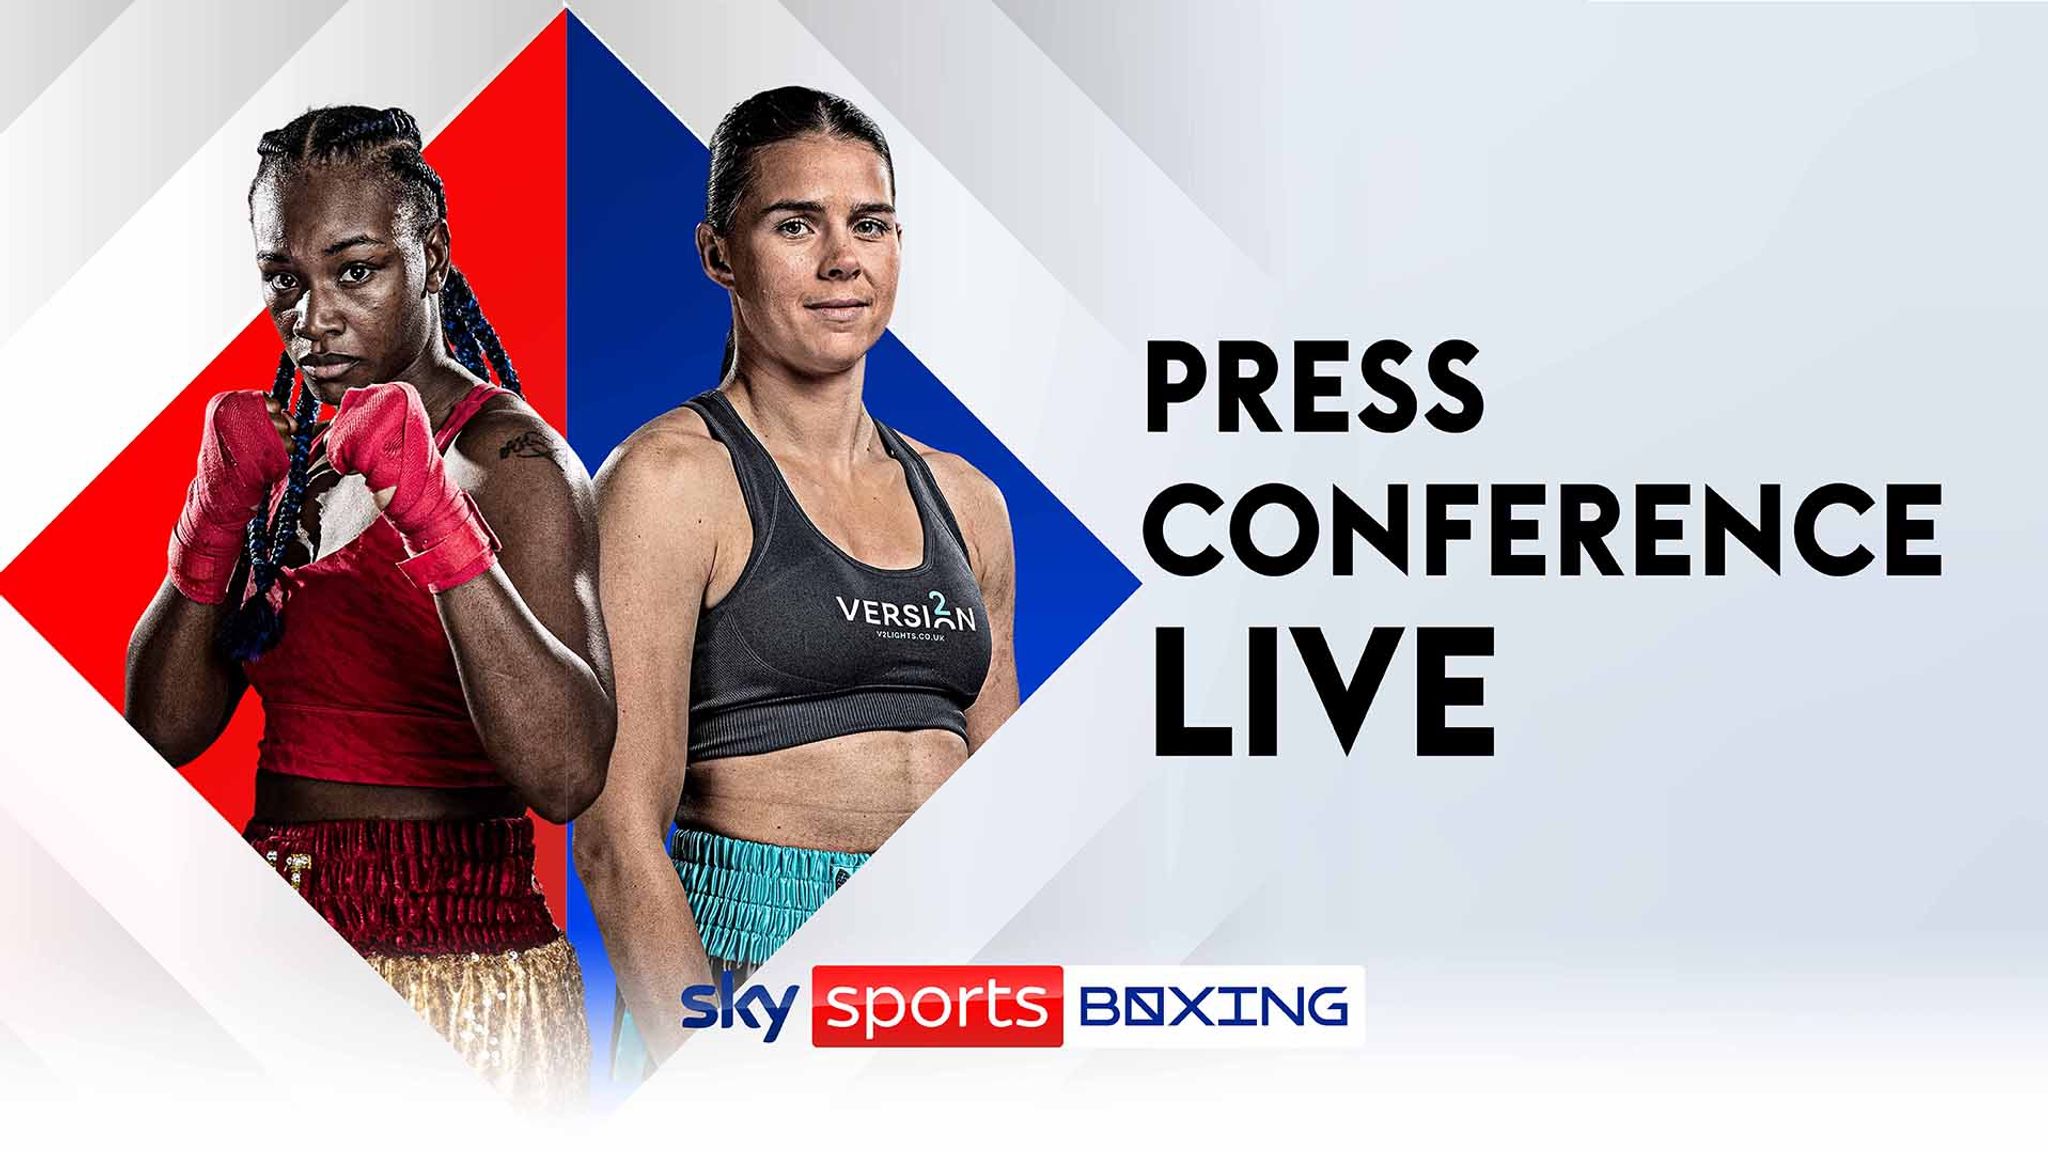 Claressa Shields vs Savannah Marshall Watch live stream of final press conference for undisputed world title fight Boxing News Sky Sports